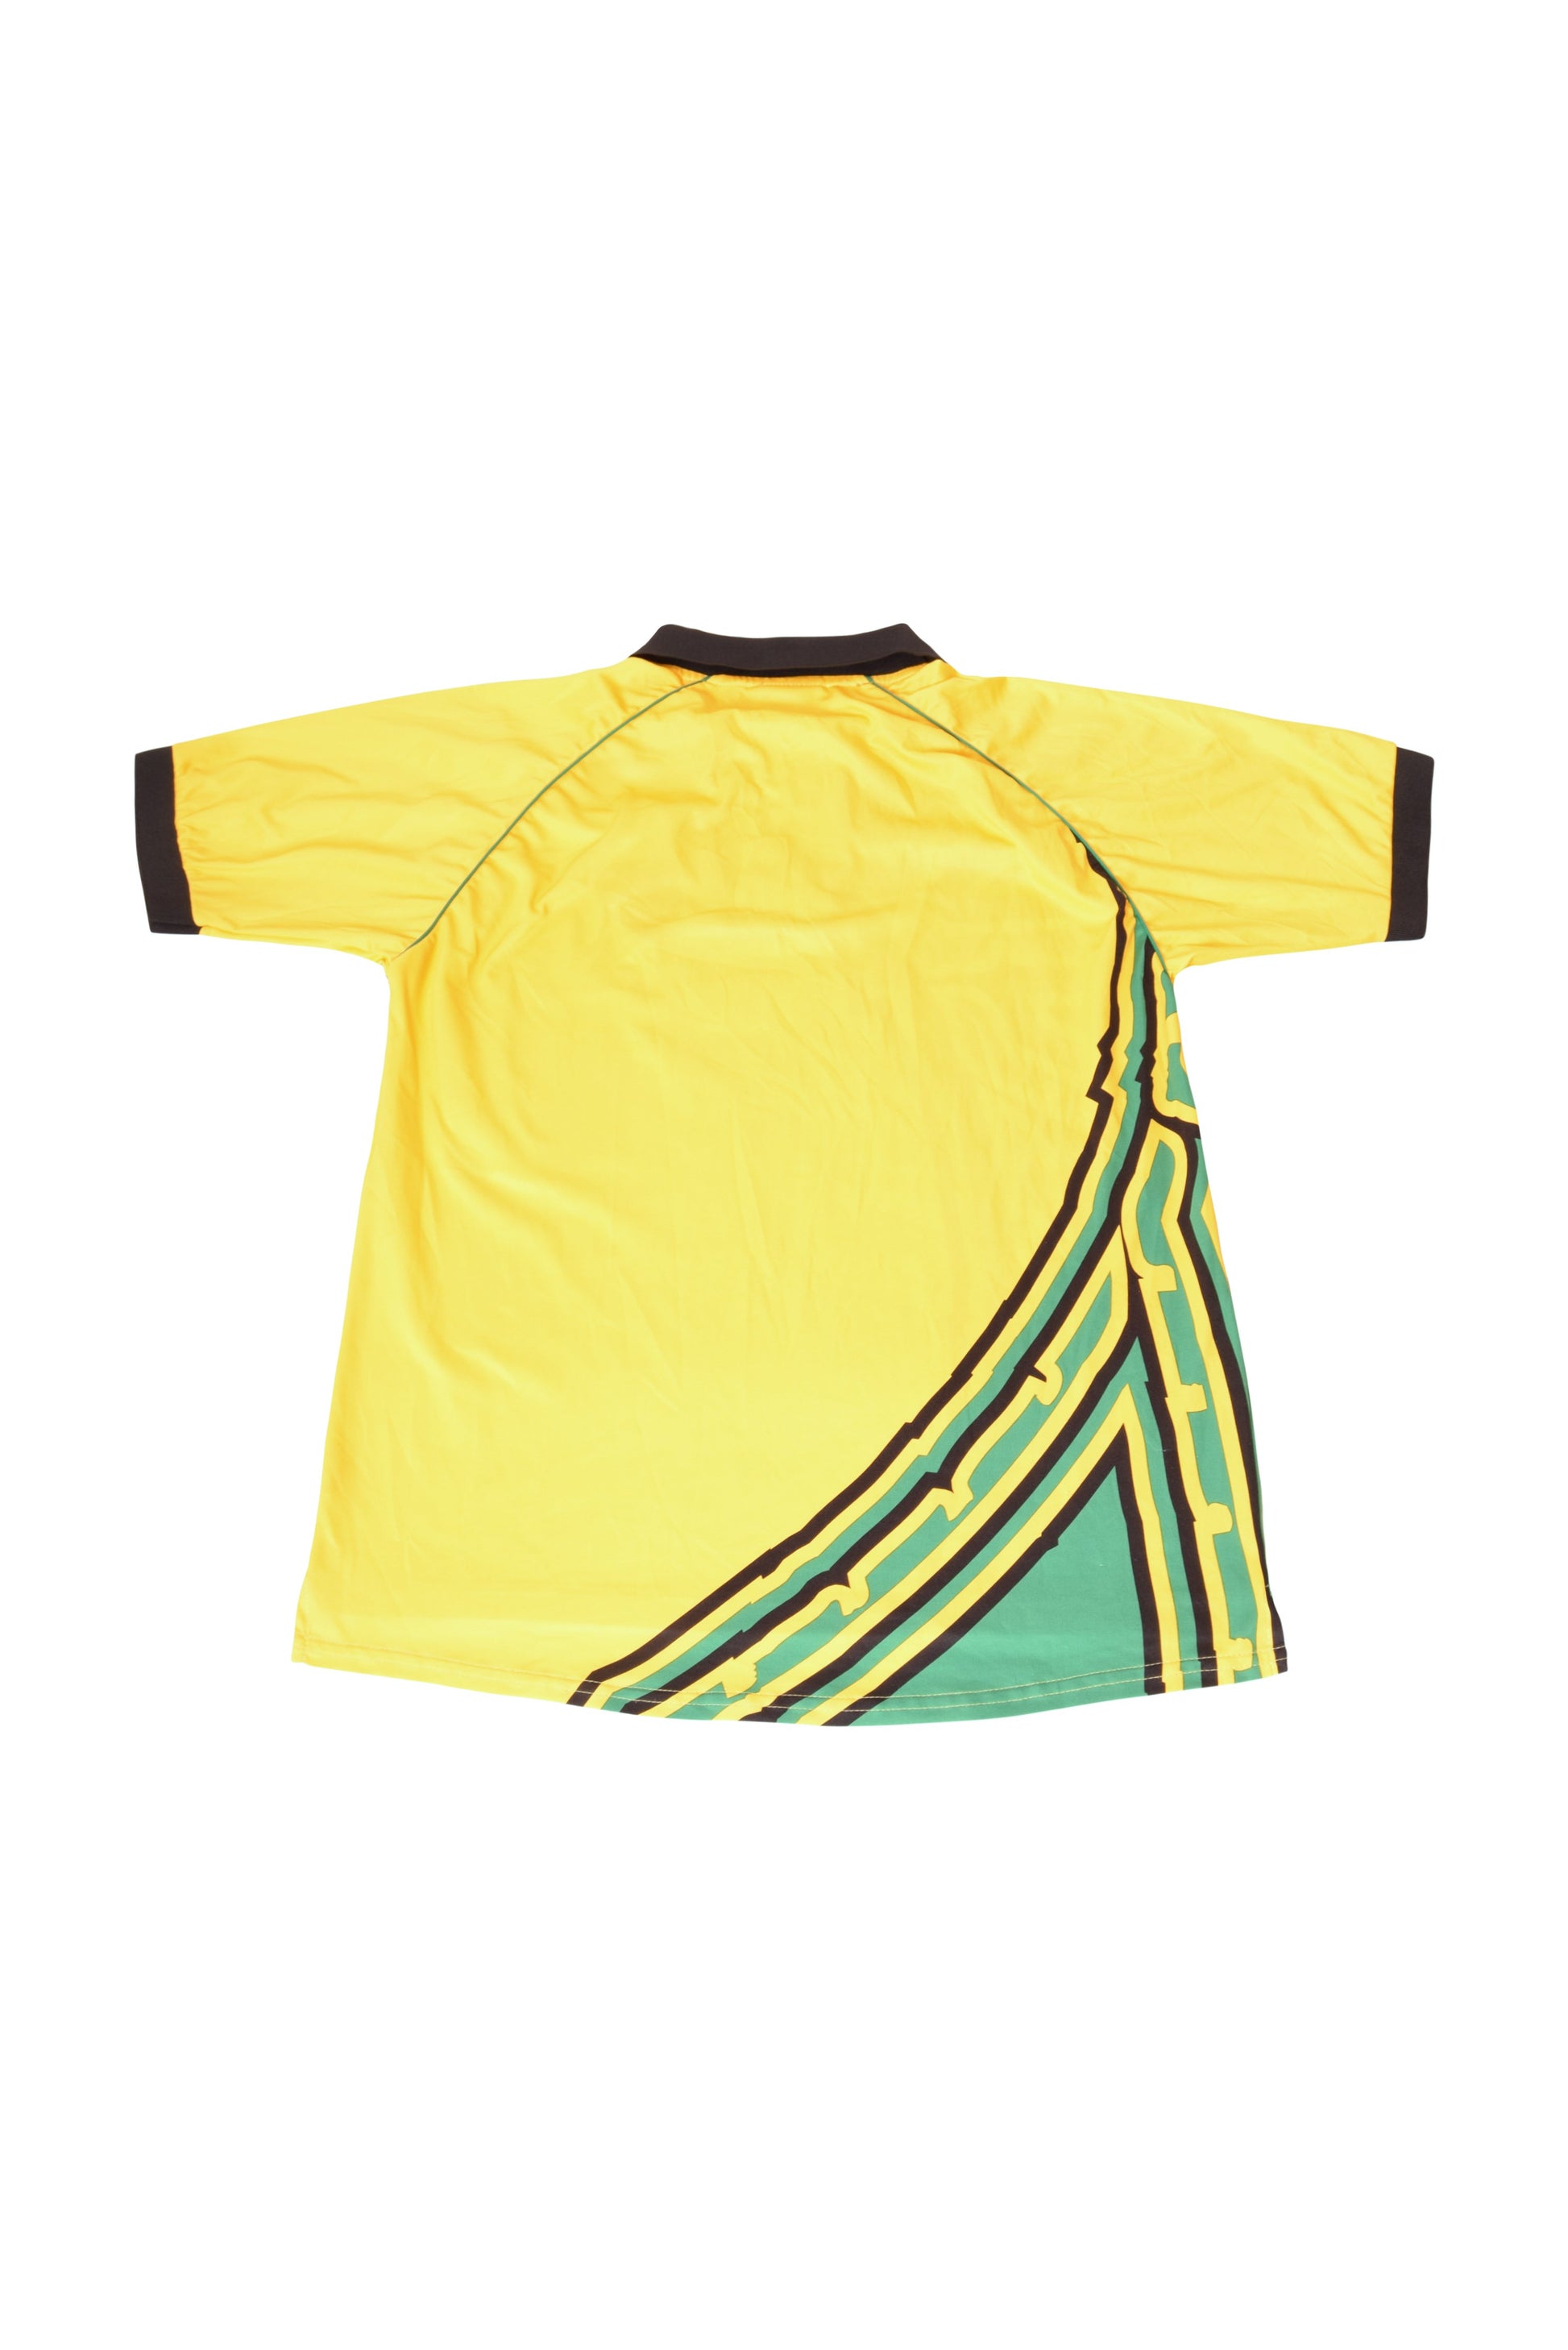 Vintage Jamaica Kappa 1998-2000 Home Football Shirt World Cup '98 France Made in Italy Size XL